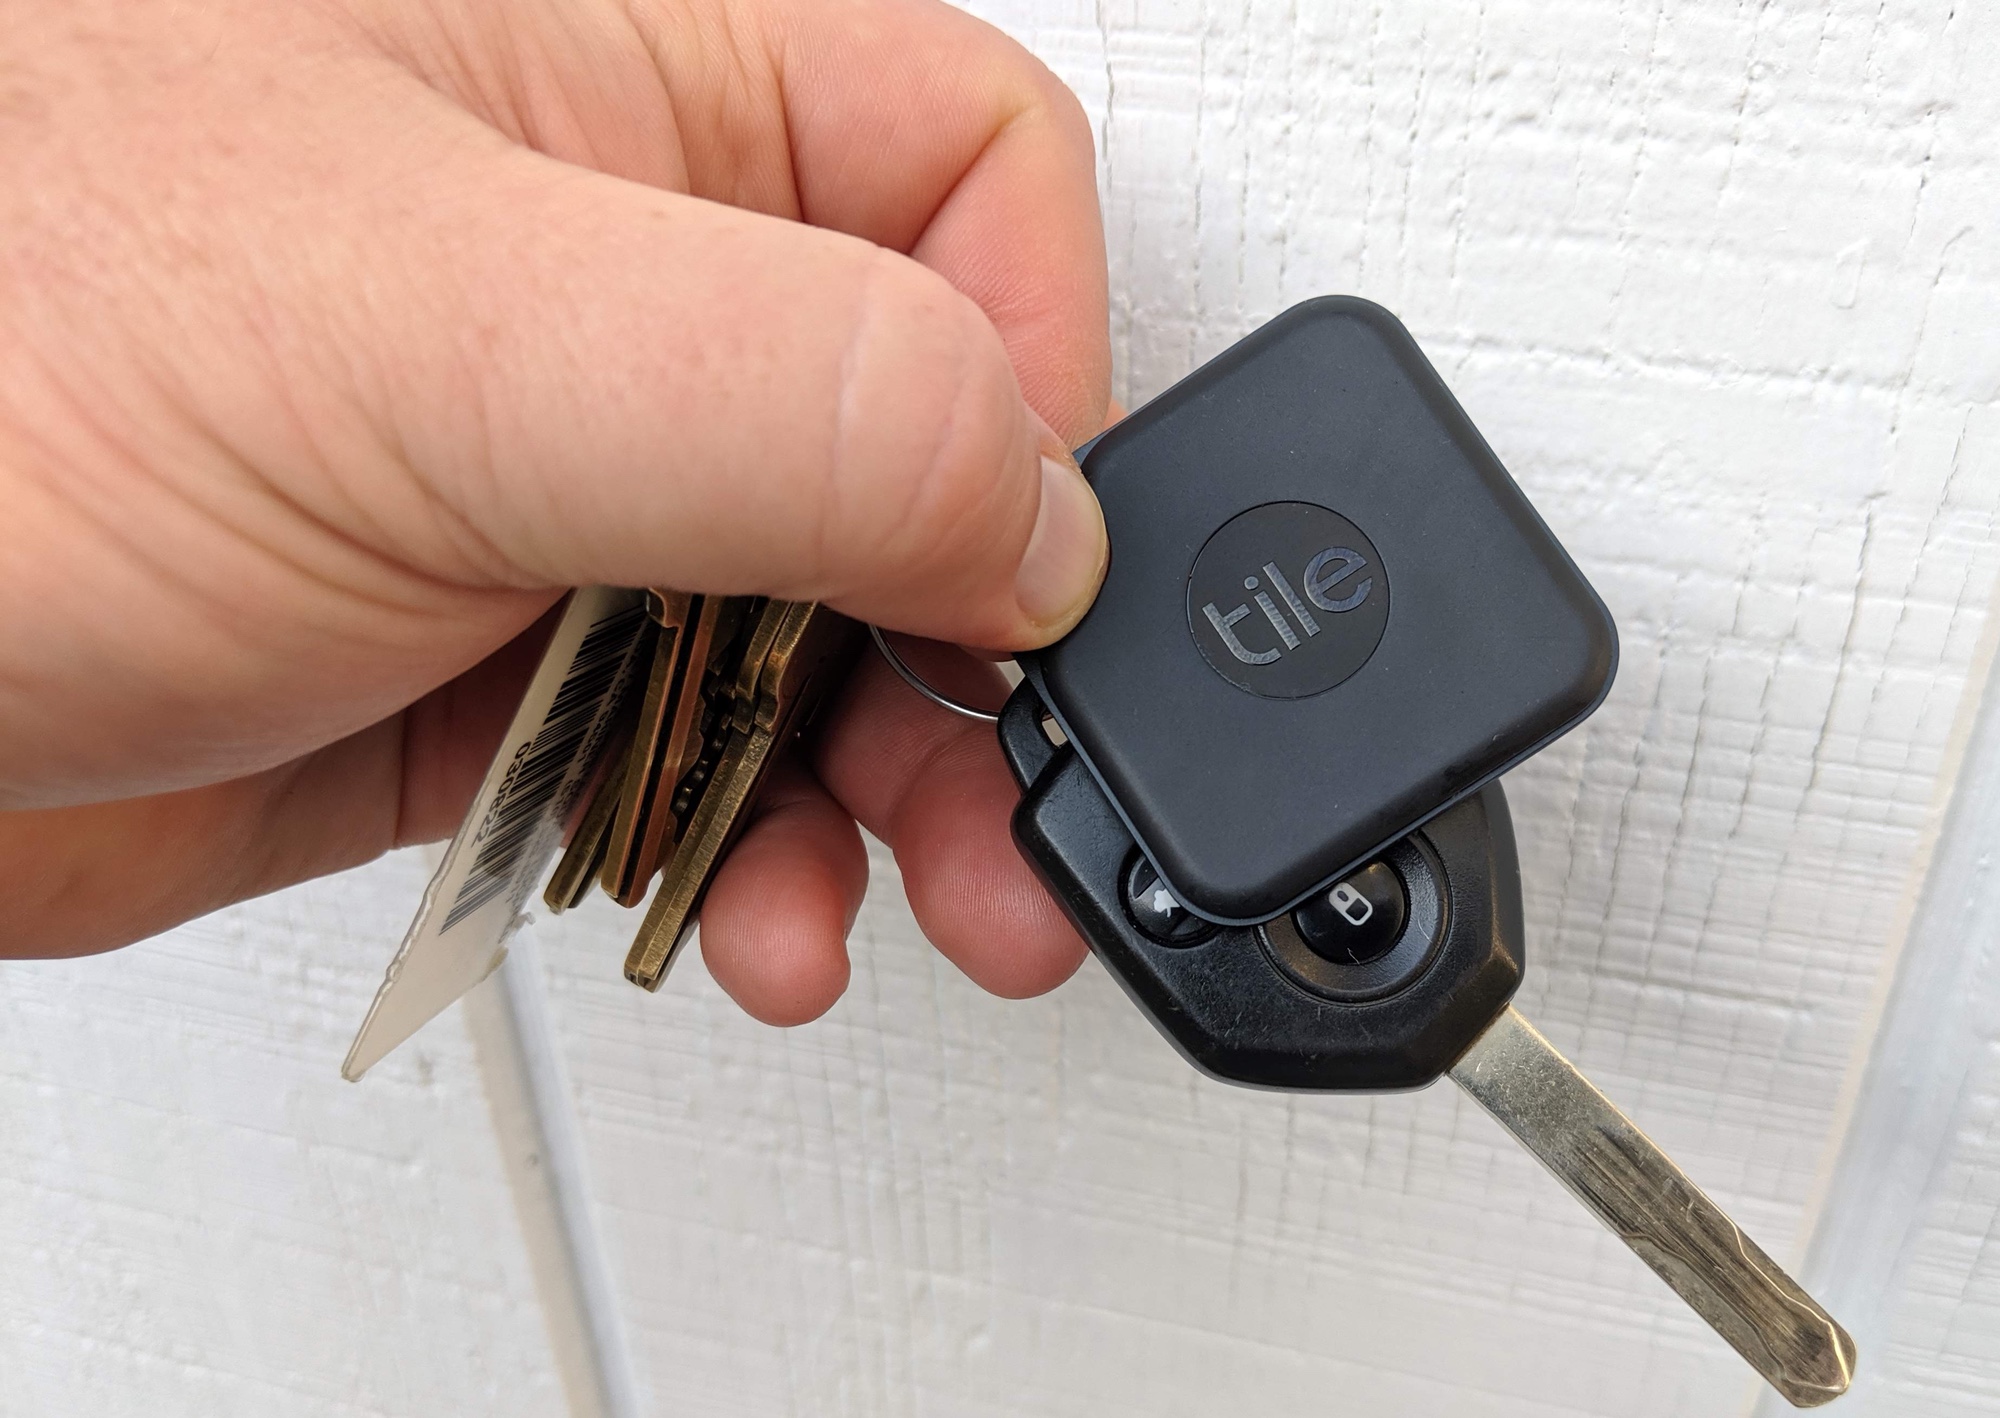 Best key finder in 2021 AirTag vs. Tile vs. SmartThings vs. Chipolo